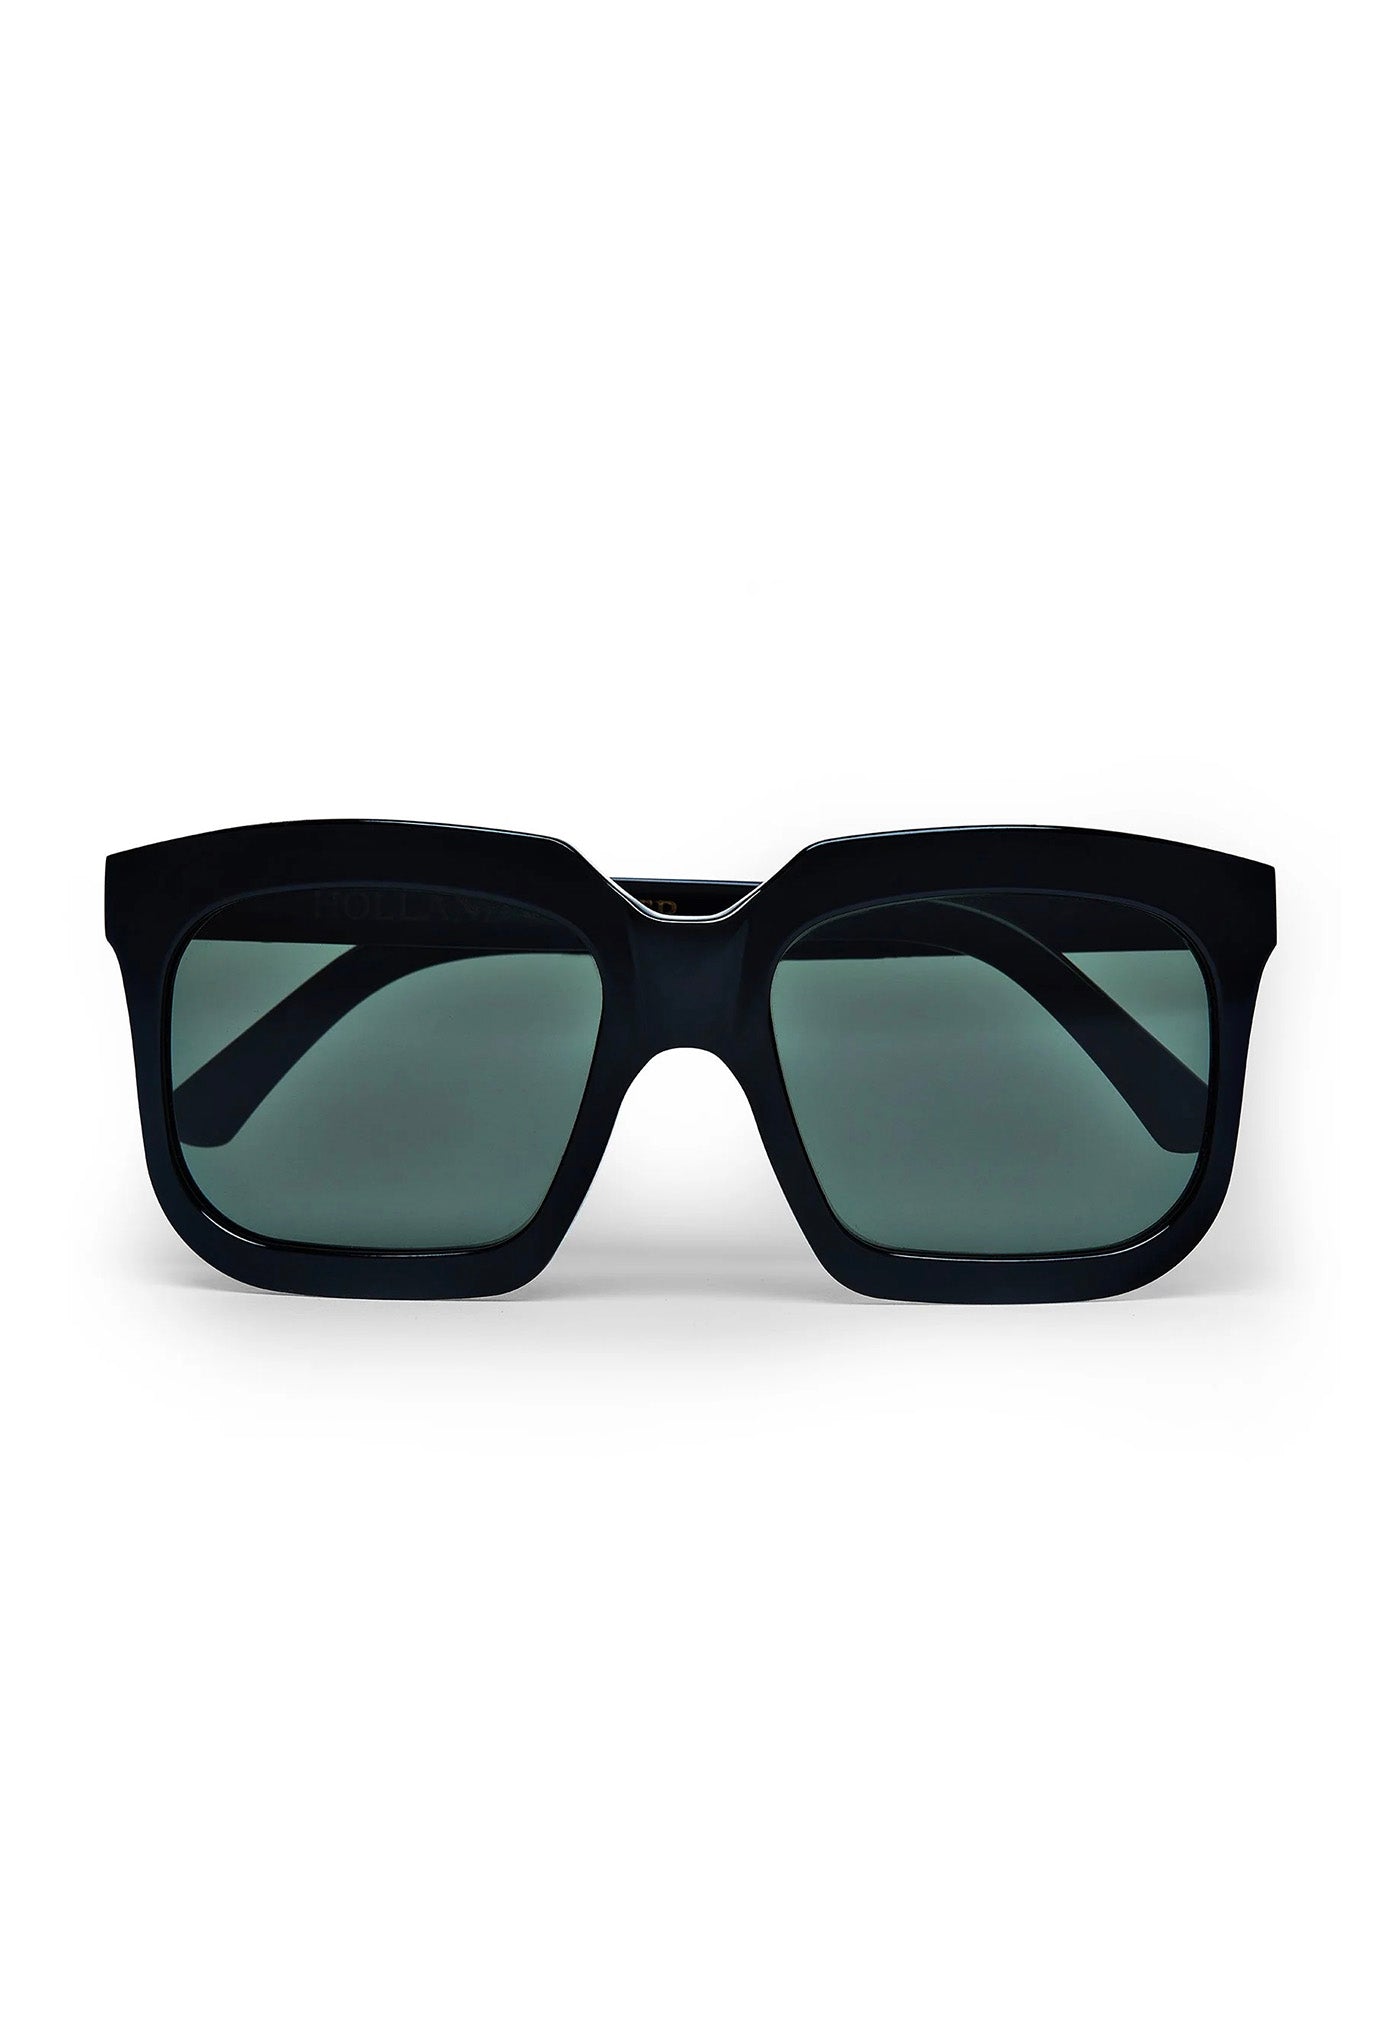 City Sunglasses - Black sold by Angel Divine